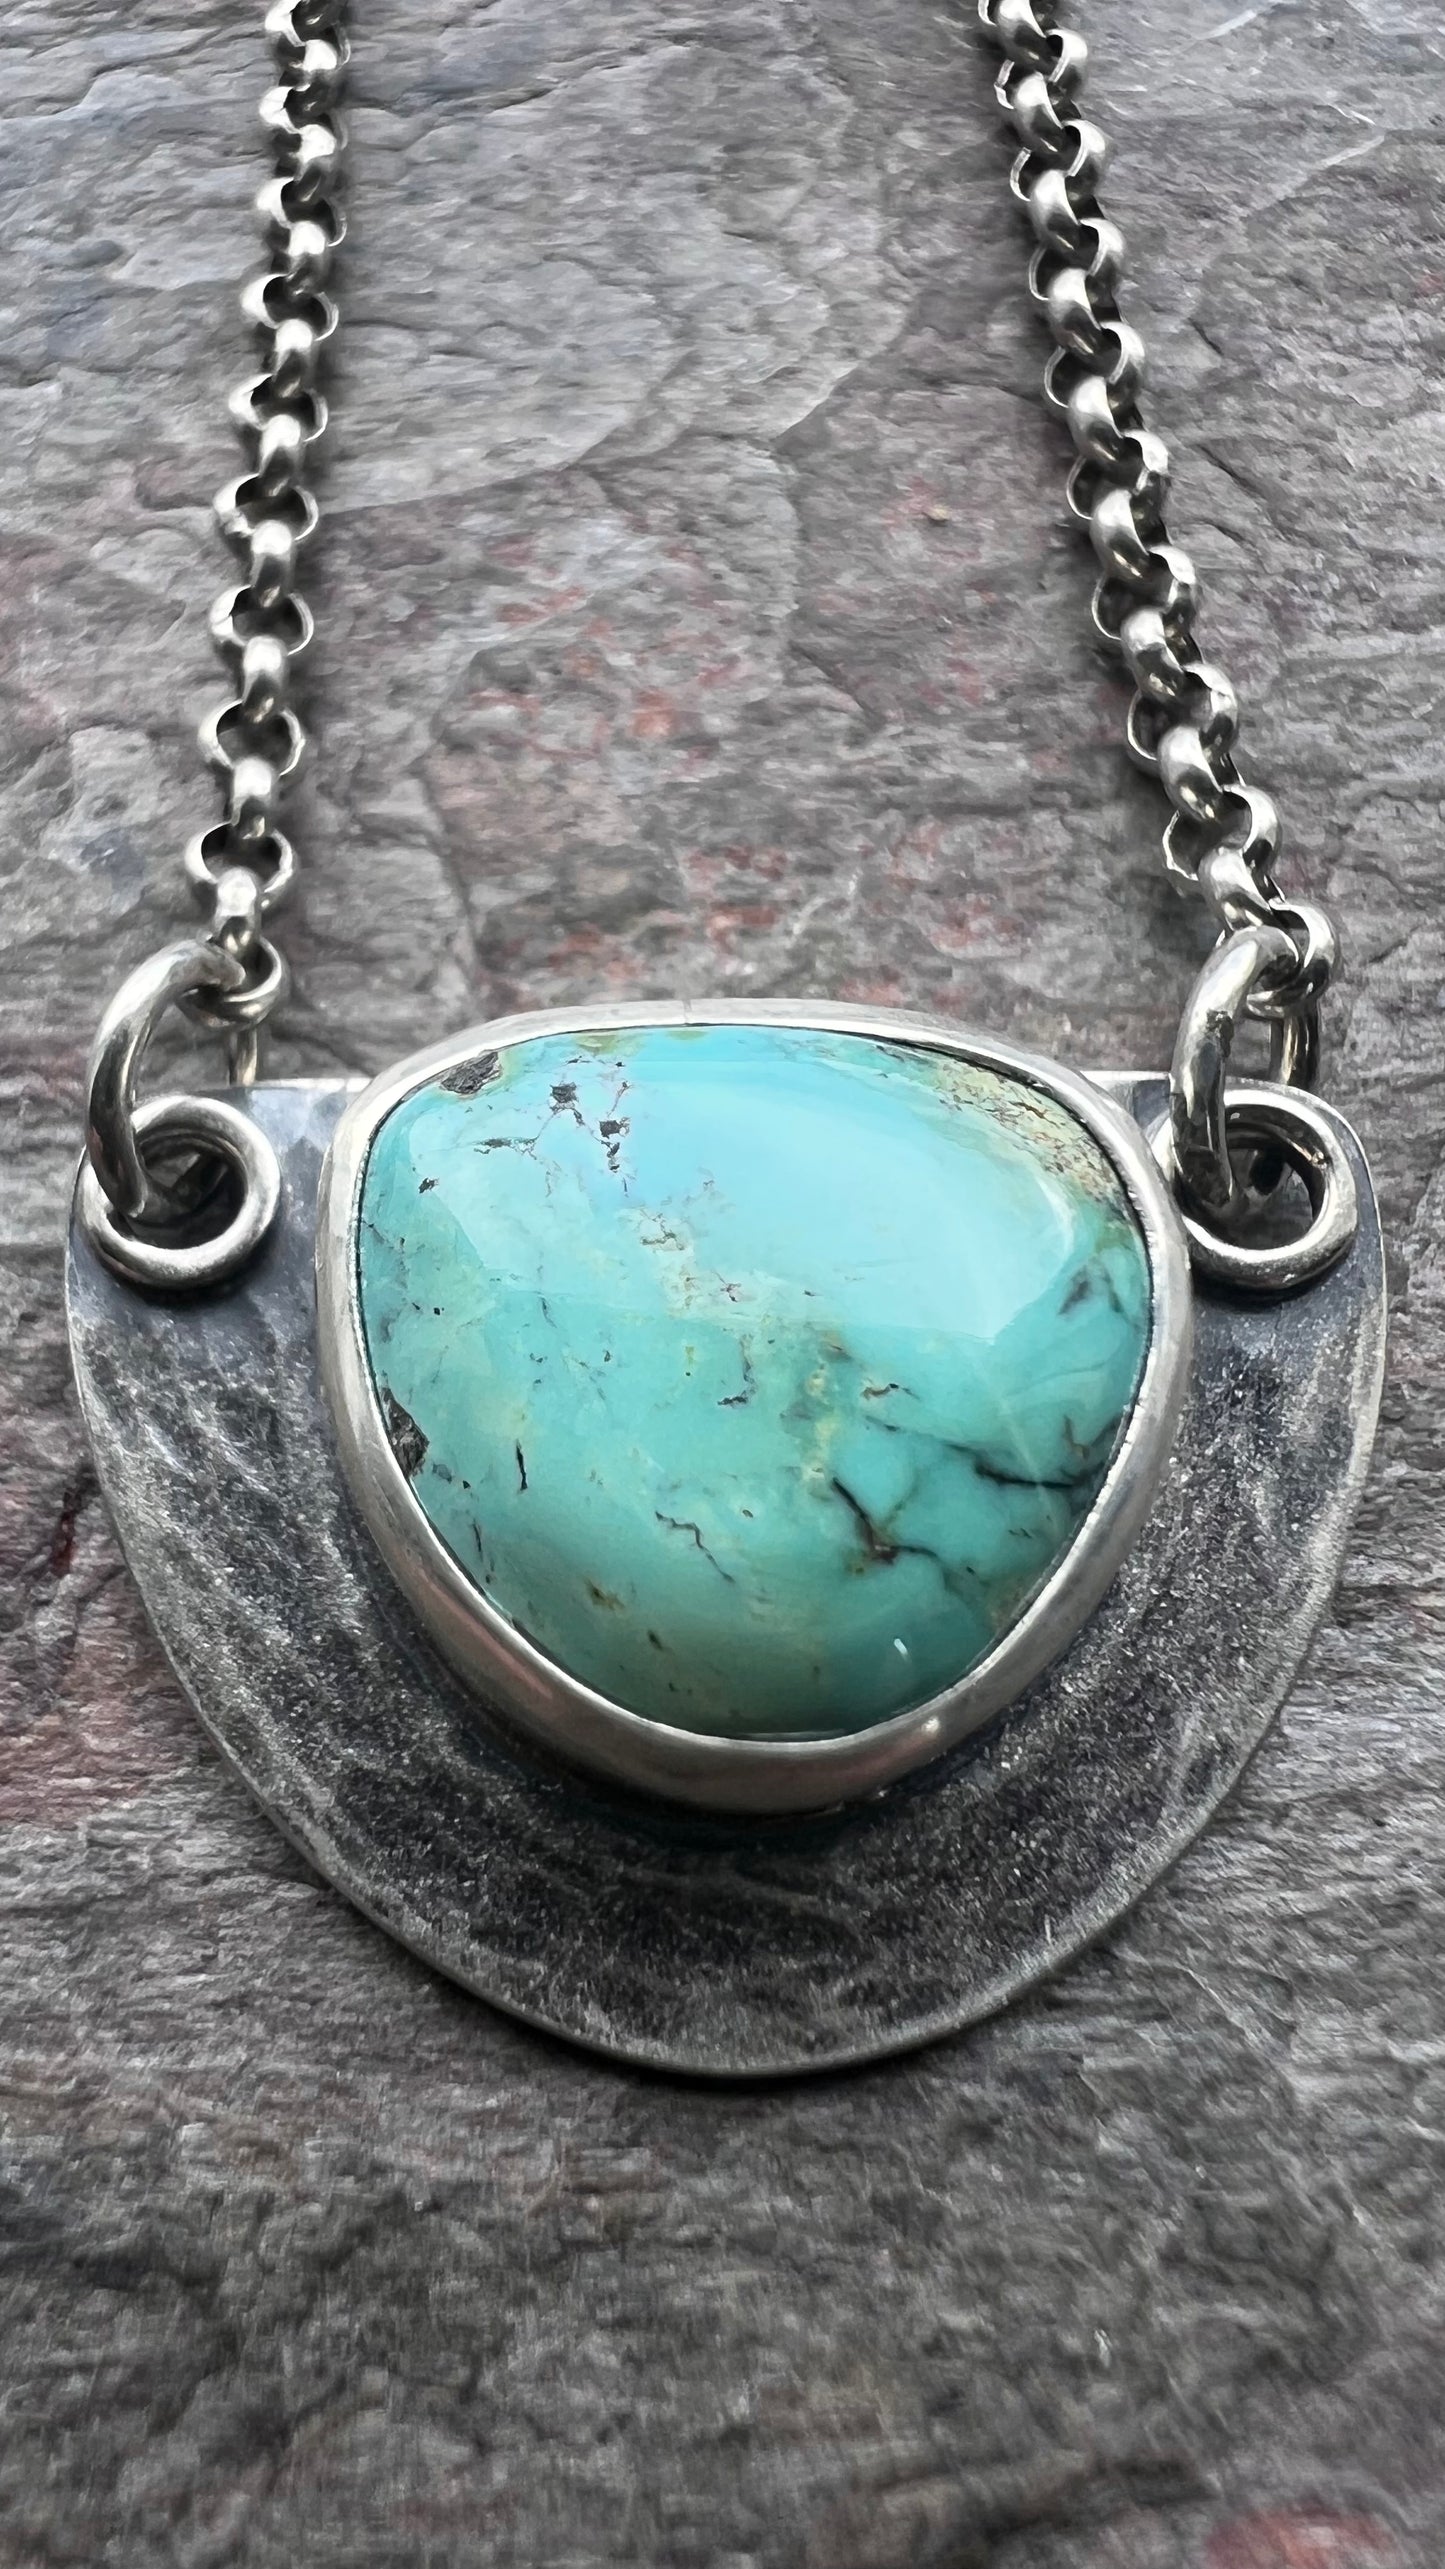 Sterling Silver Turquoise Half Moon Pendant - One-of-a-Kind Turquoise Semicircle Necklace